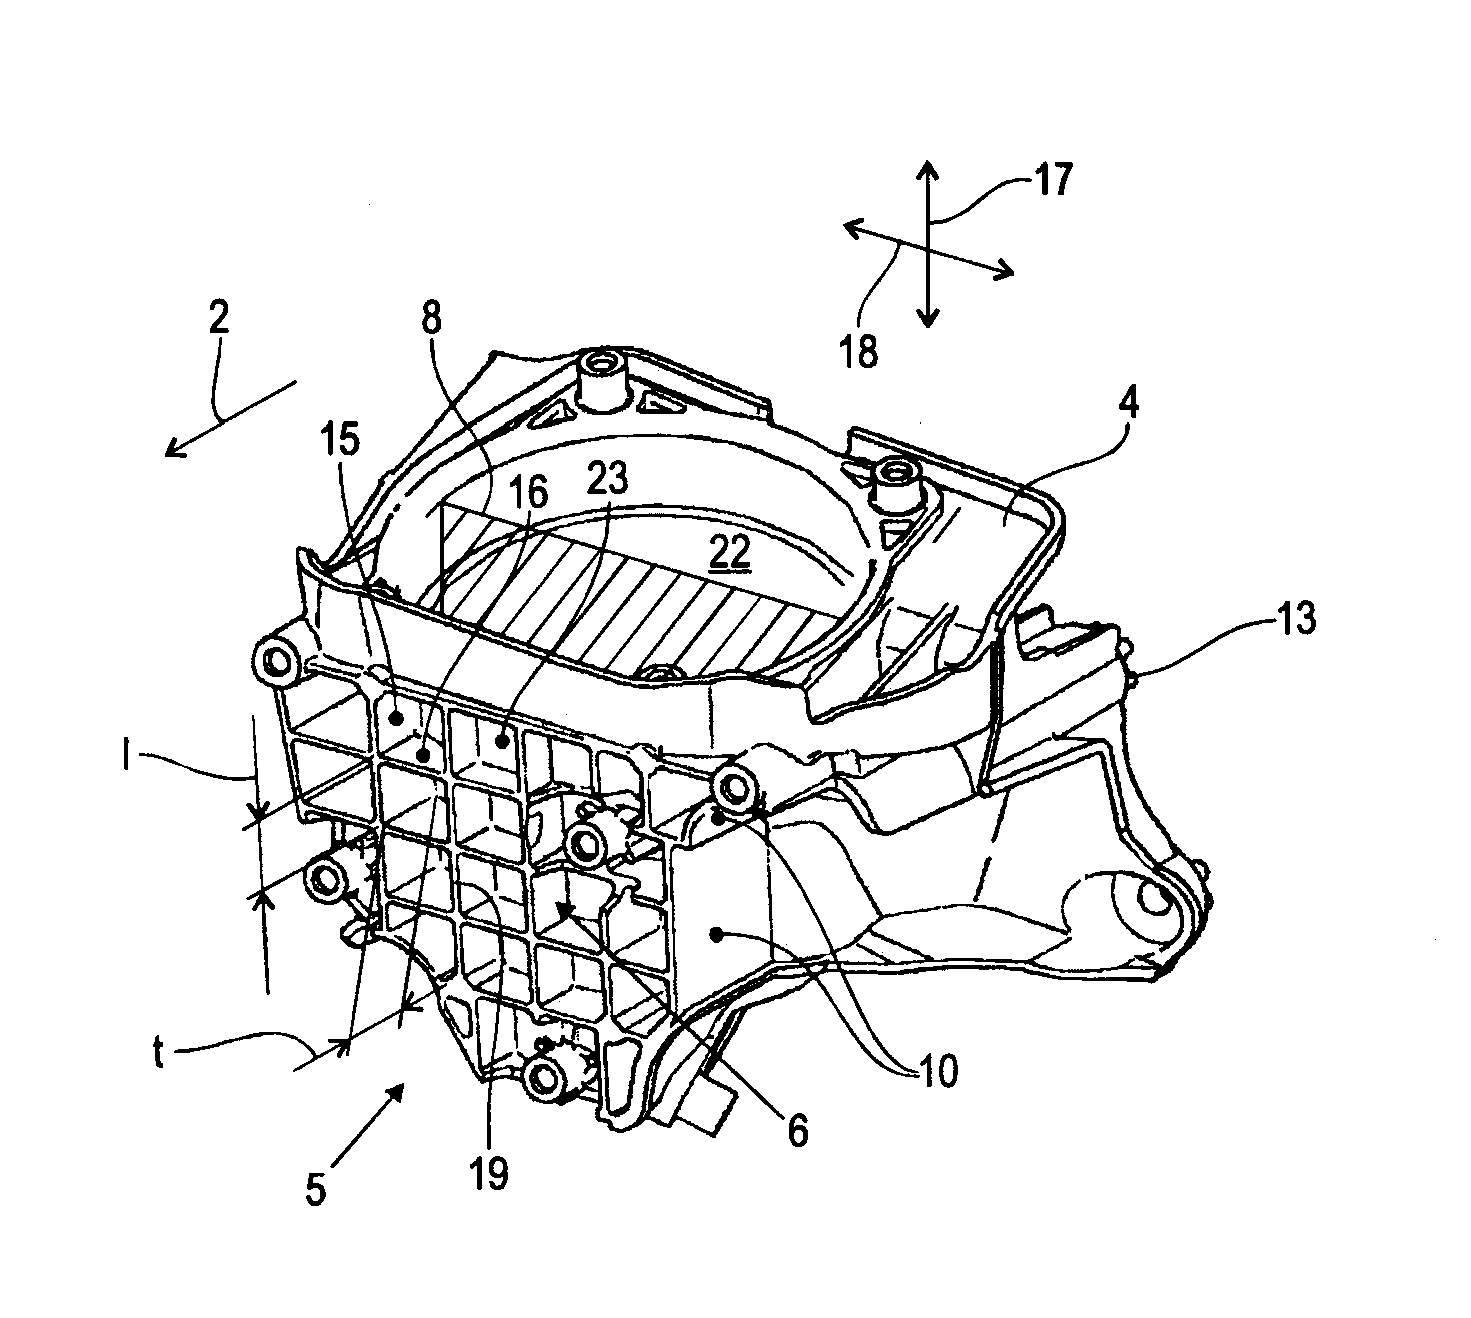 Fuel filter of a motor vehicle